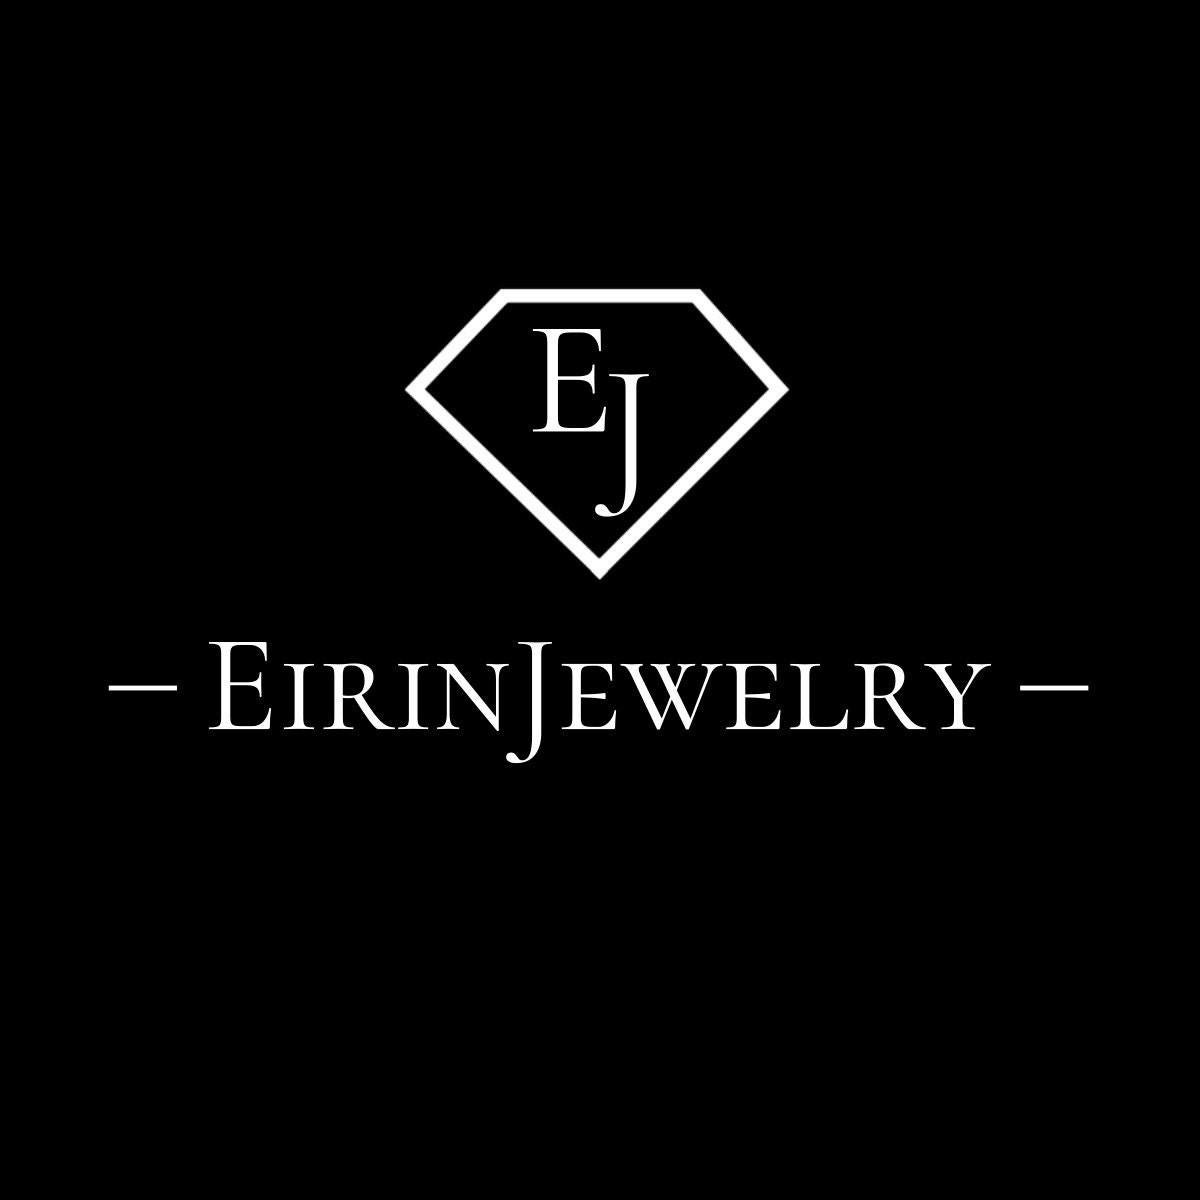 Exclusive Jewelry. Exclusive you by EirinJewelry on Etsy